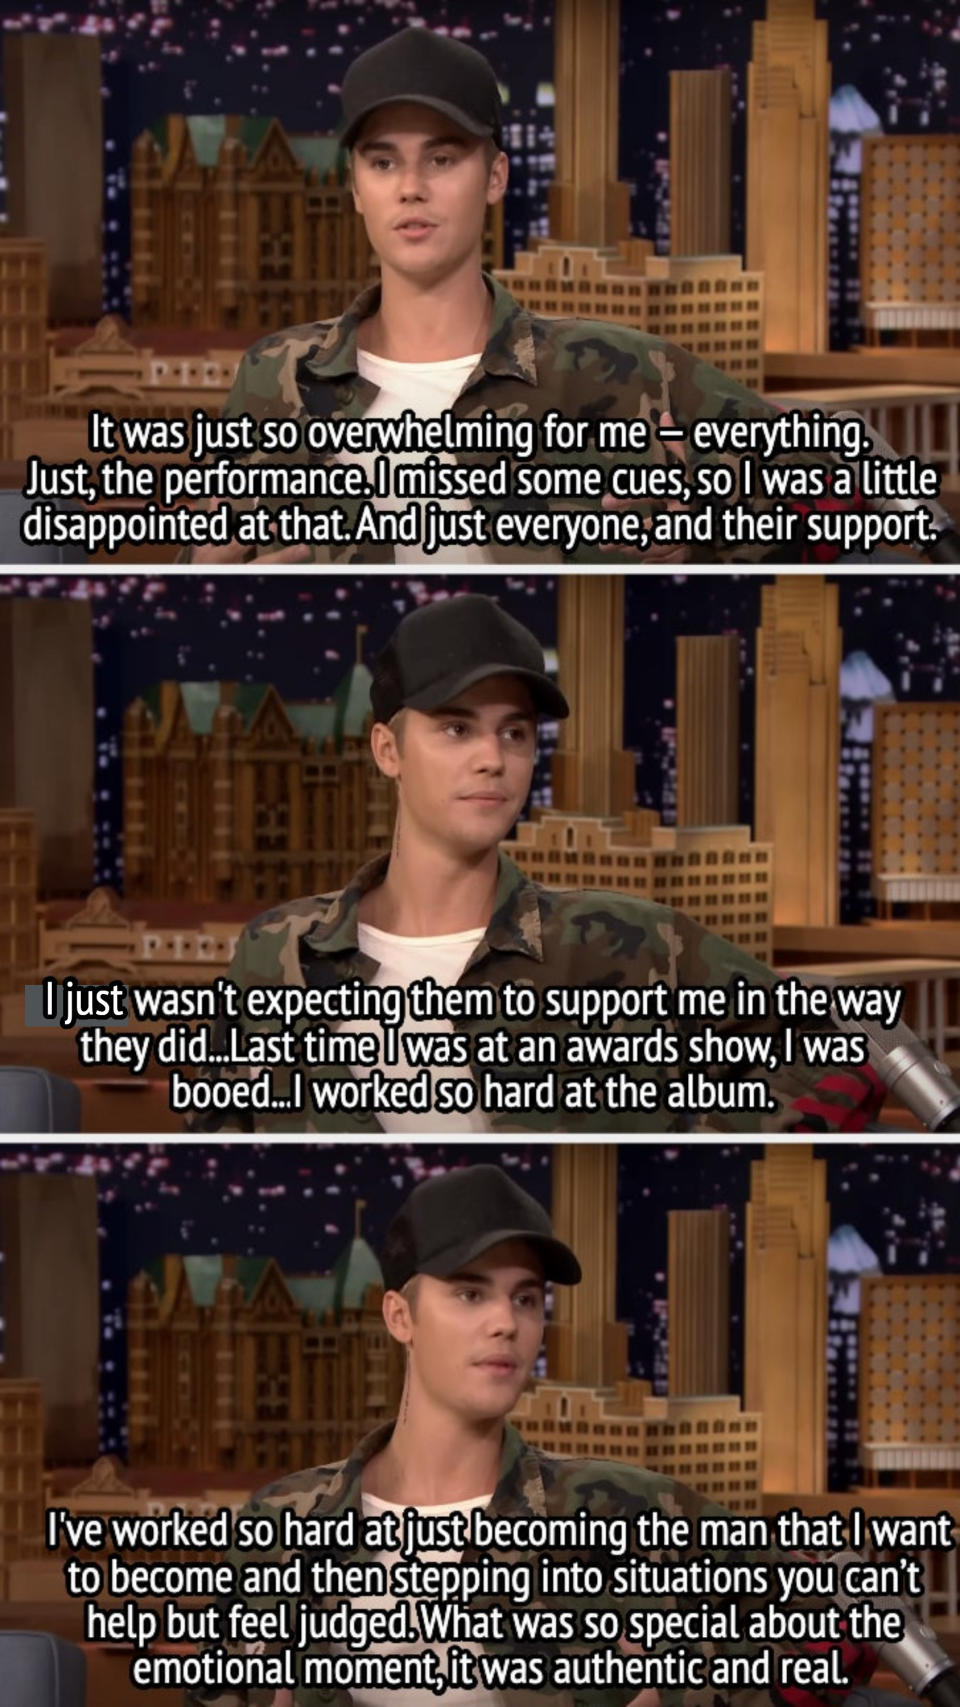 Justin says he was overwhelmed by the performance and didn't expect the audience to be so supportive